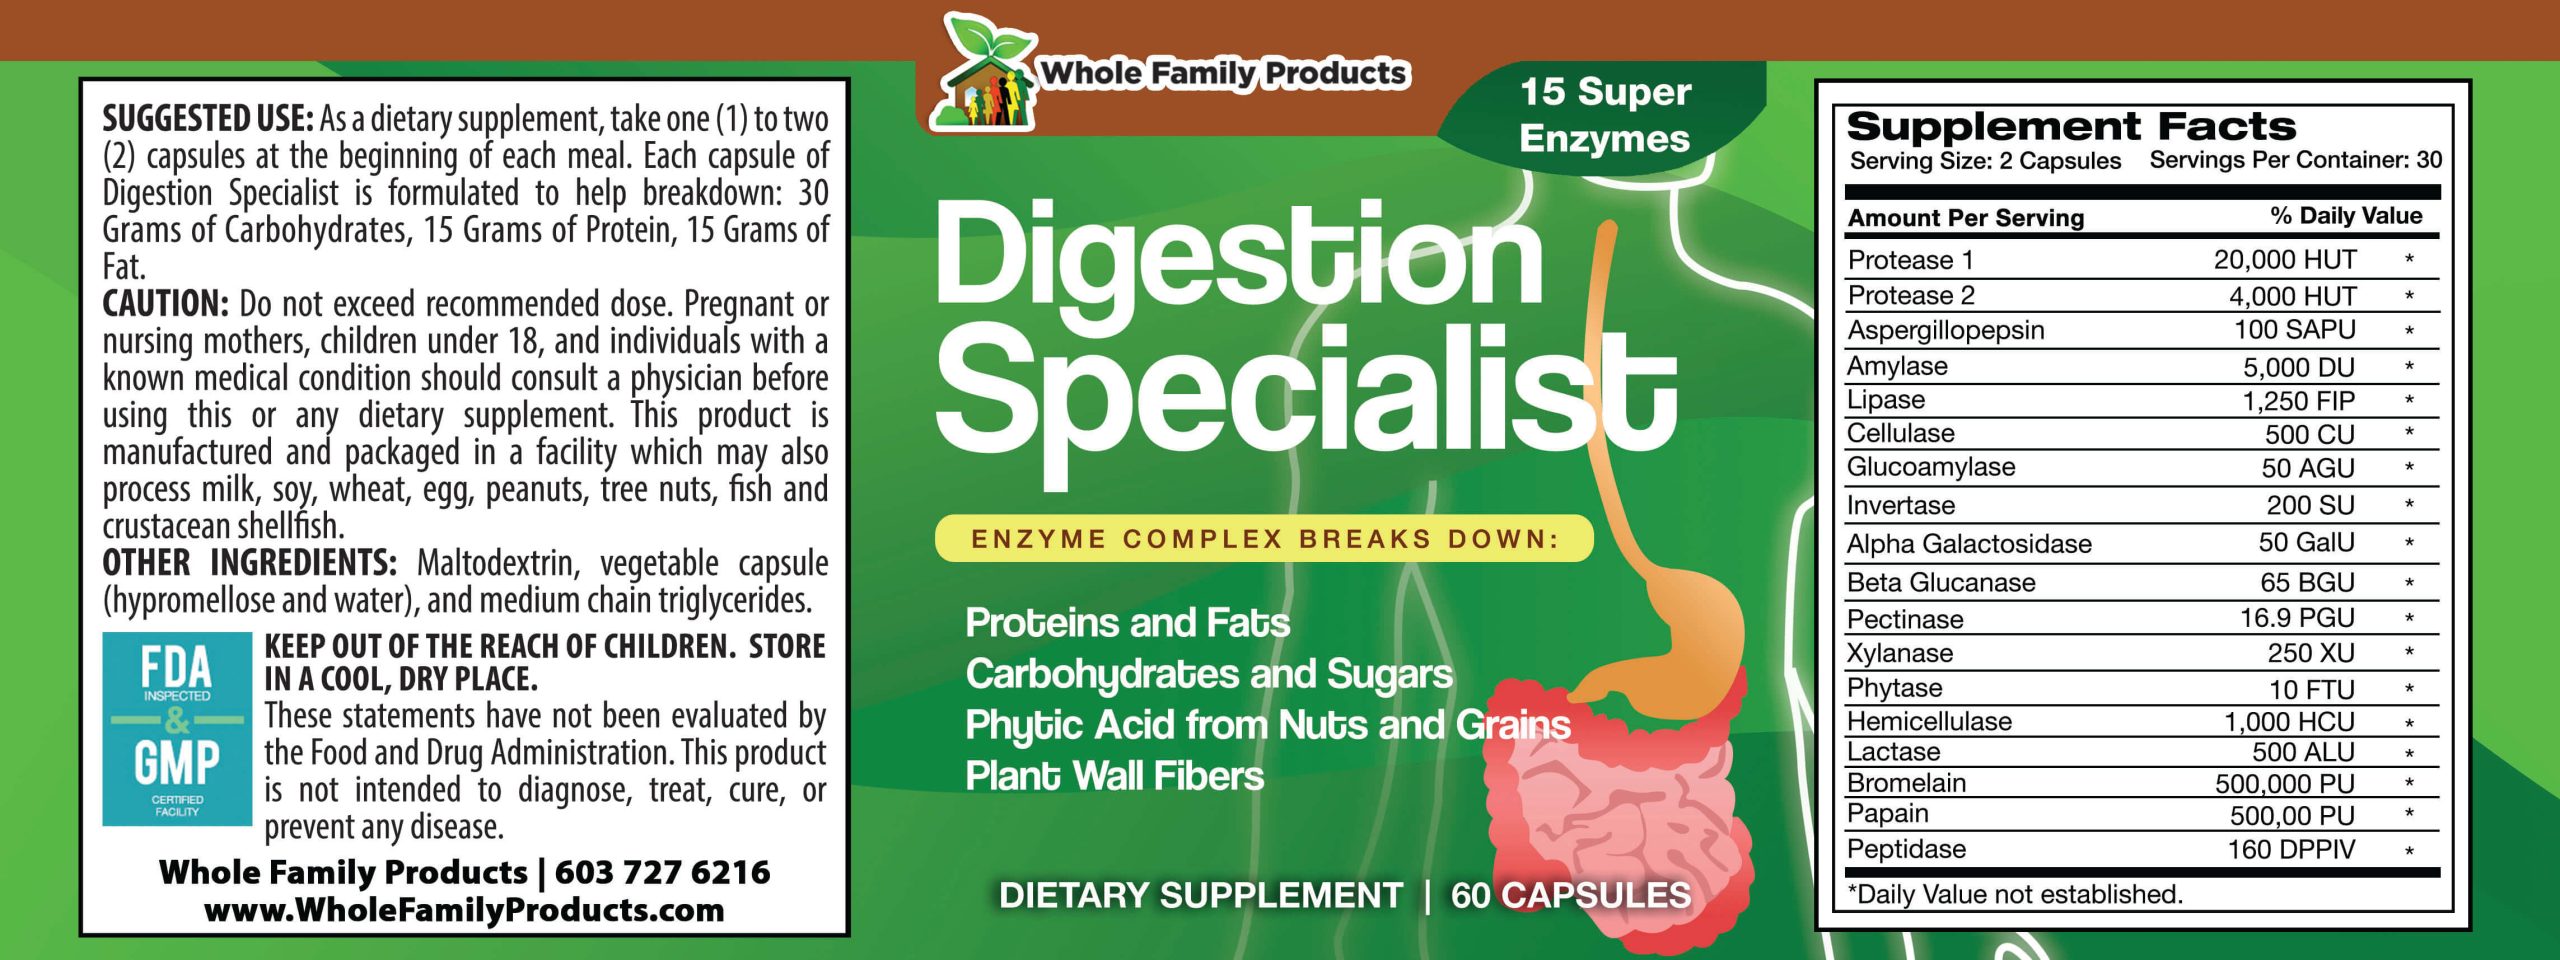 Digestion Specialist Product Label